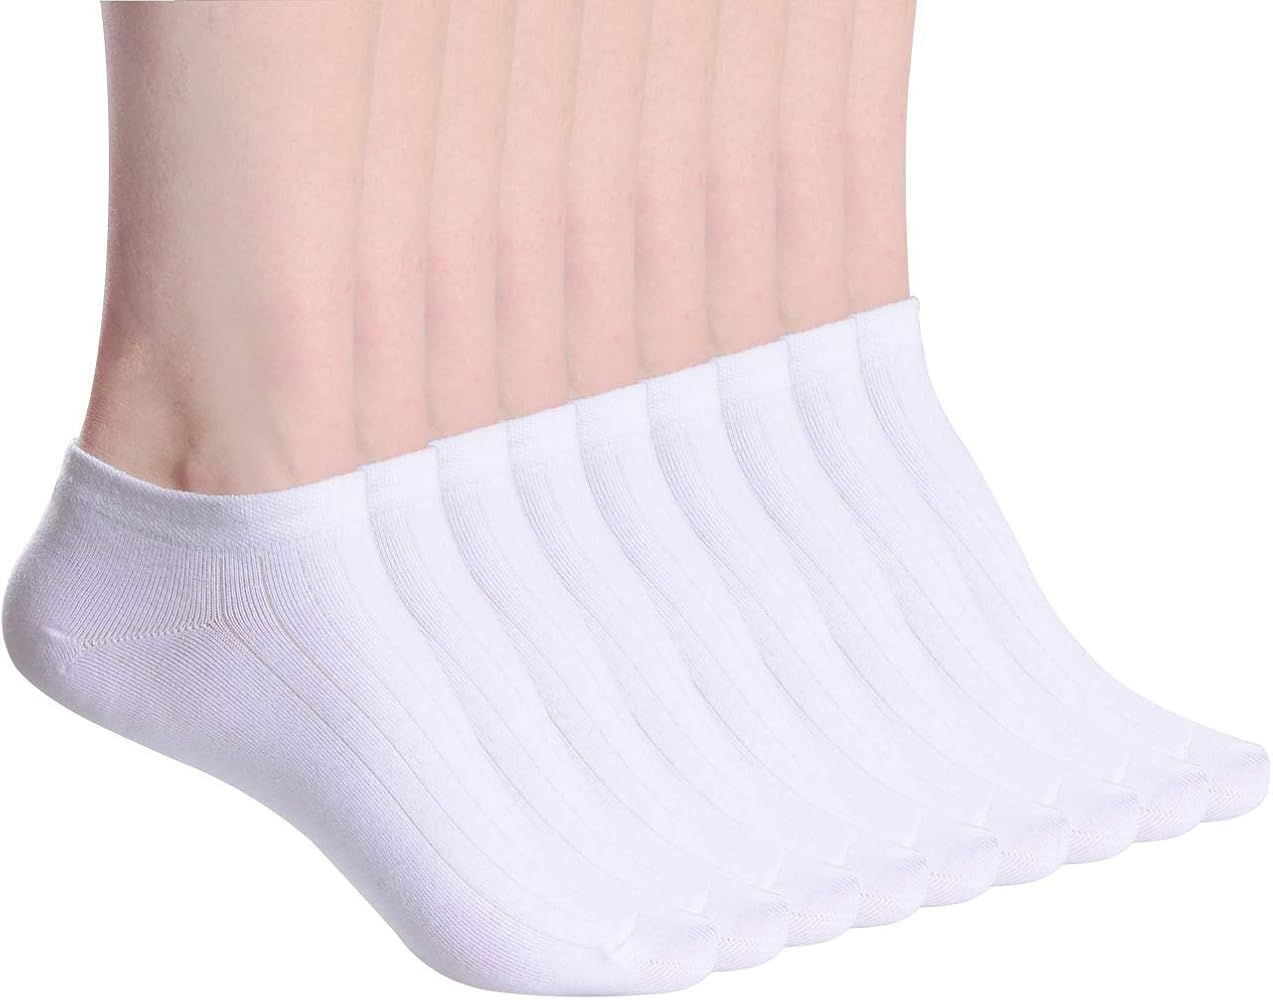 Women's Low Cut Socks,3-15 Pair Ankle No Show Athletic Short Cotton Socks by Sioncy | Amazon (US)